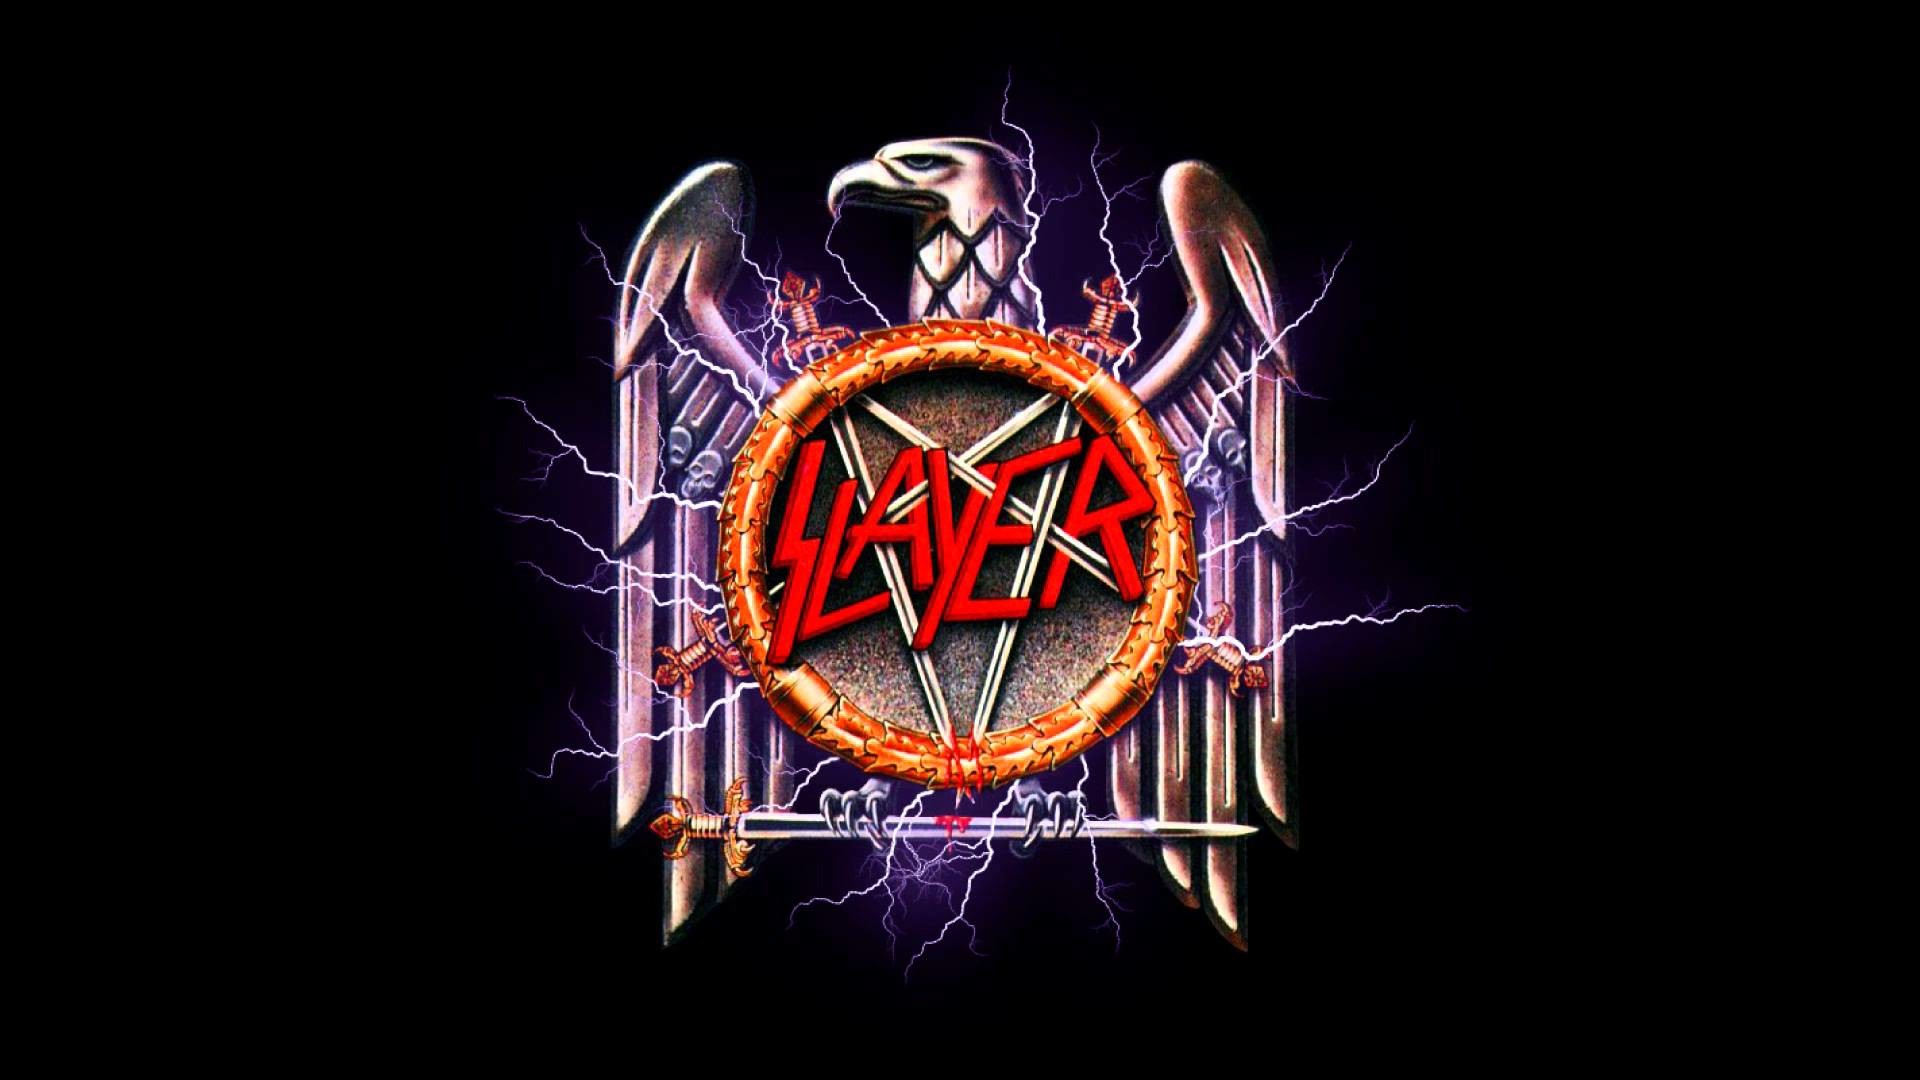 1920x1080 Slayer-Angel of Death (8-Bit Cover)